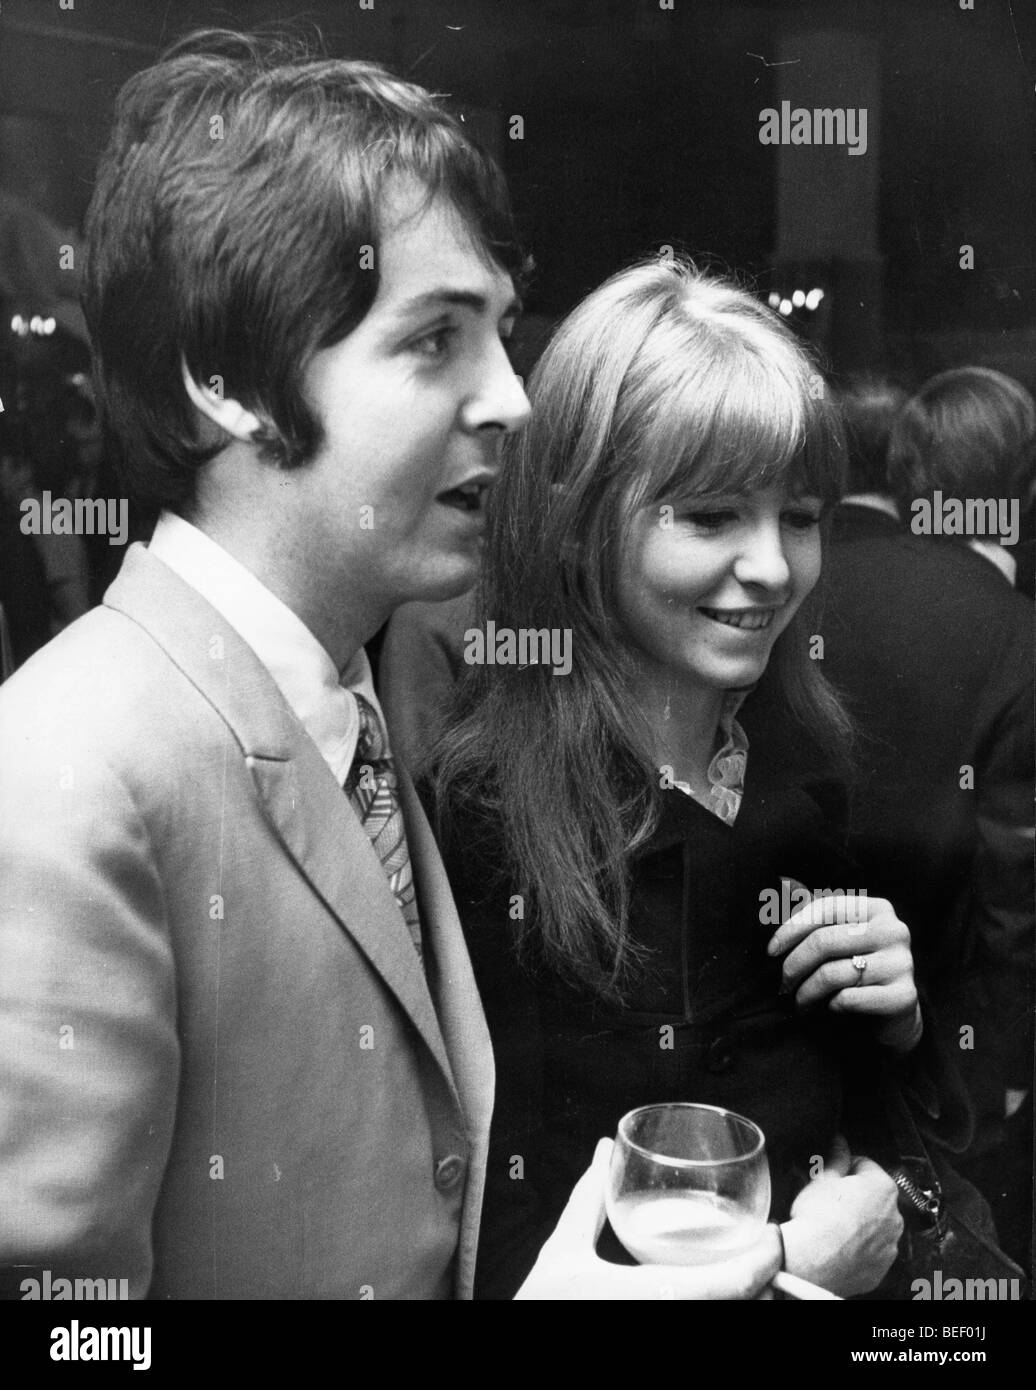 Beatle Paul McCartney at event with Jane Asher Stock Photo - Alamy